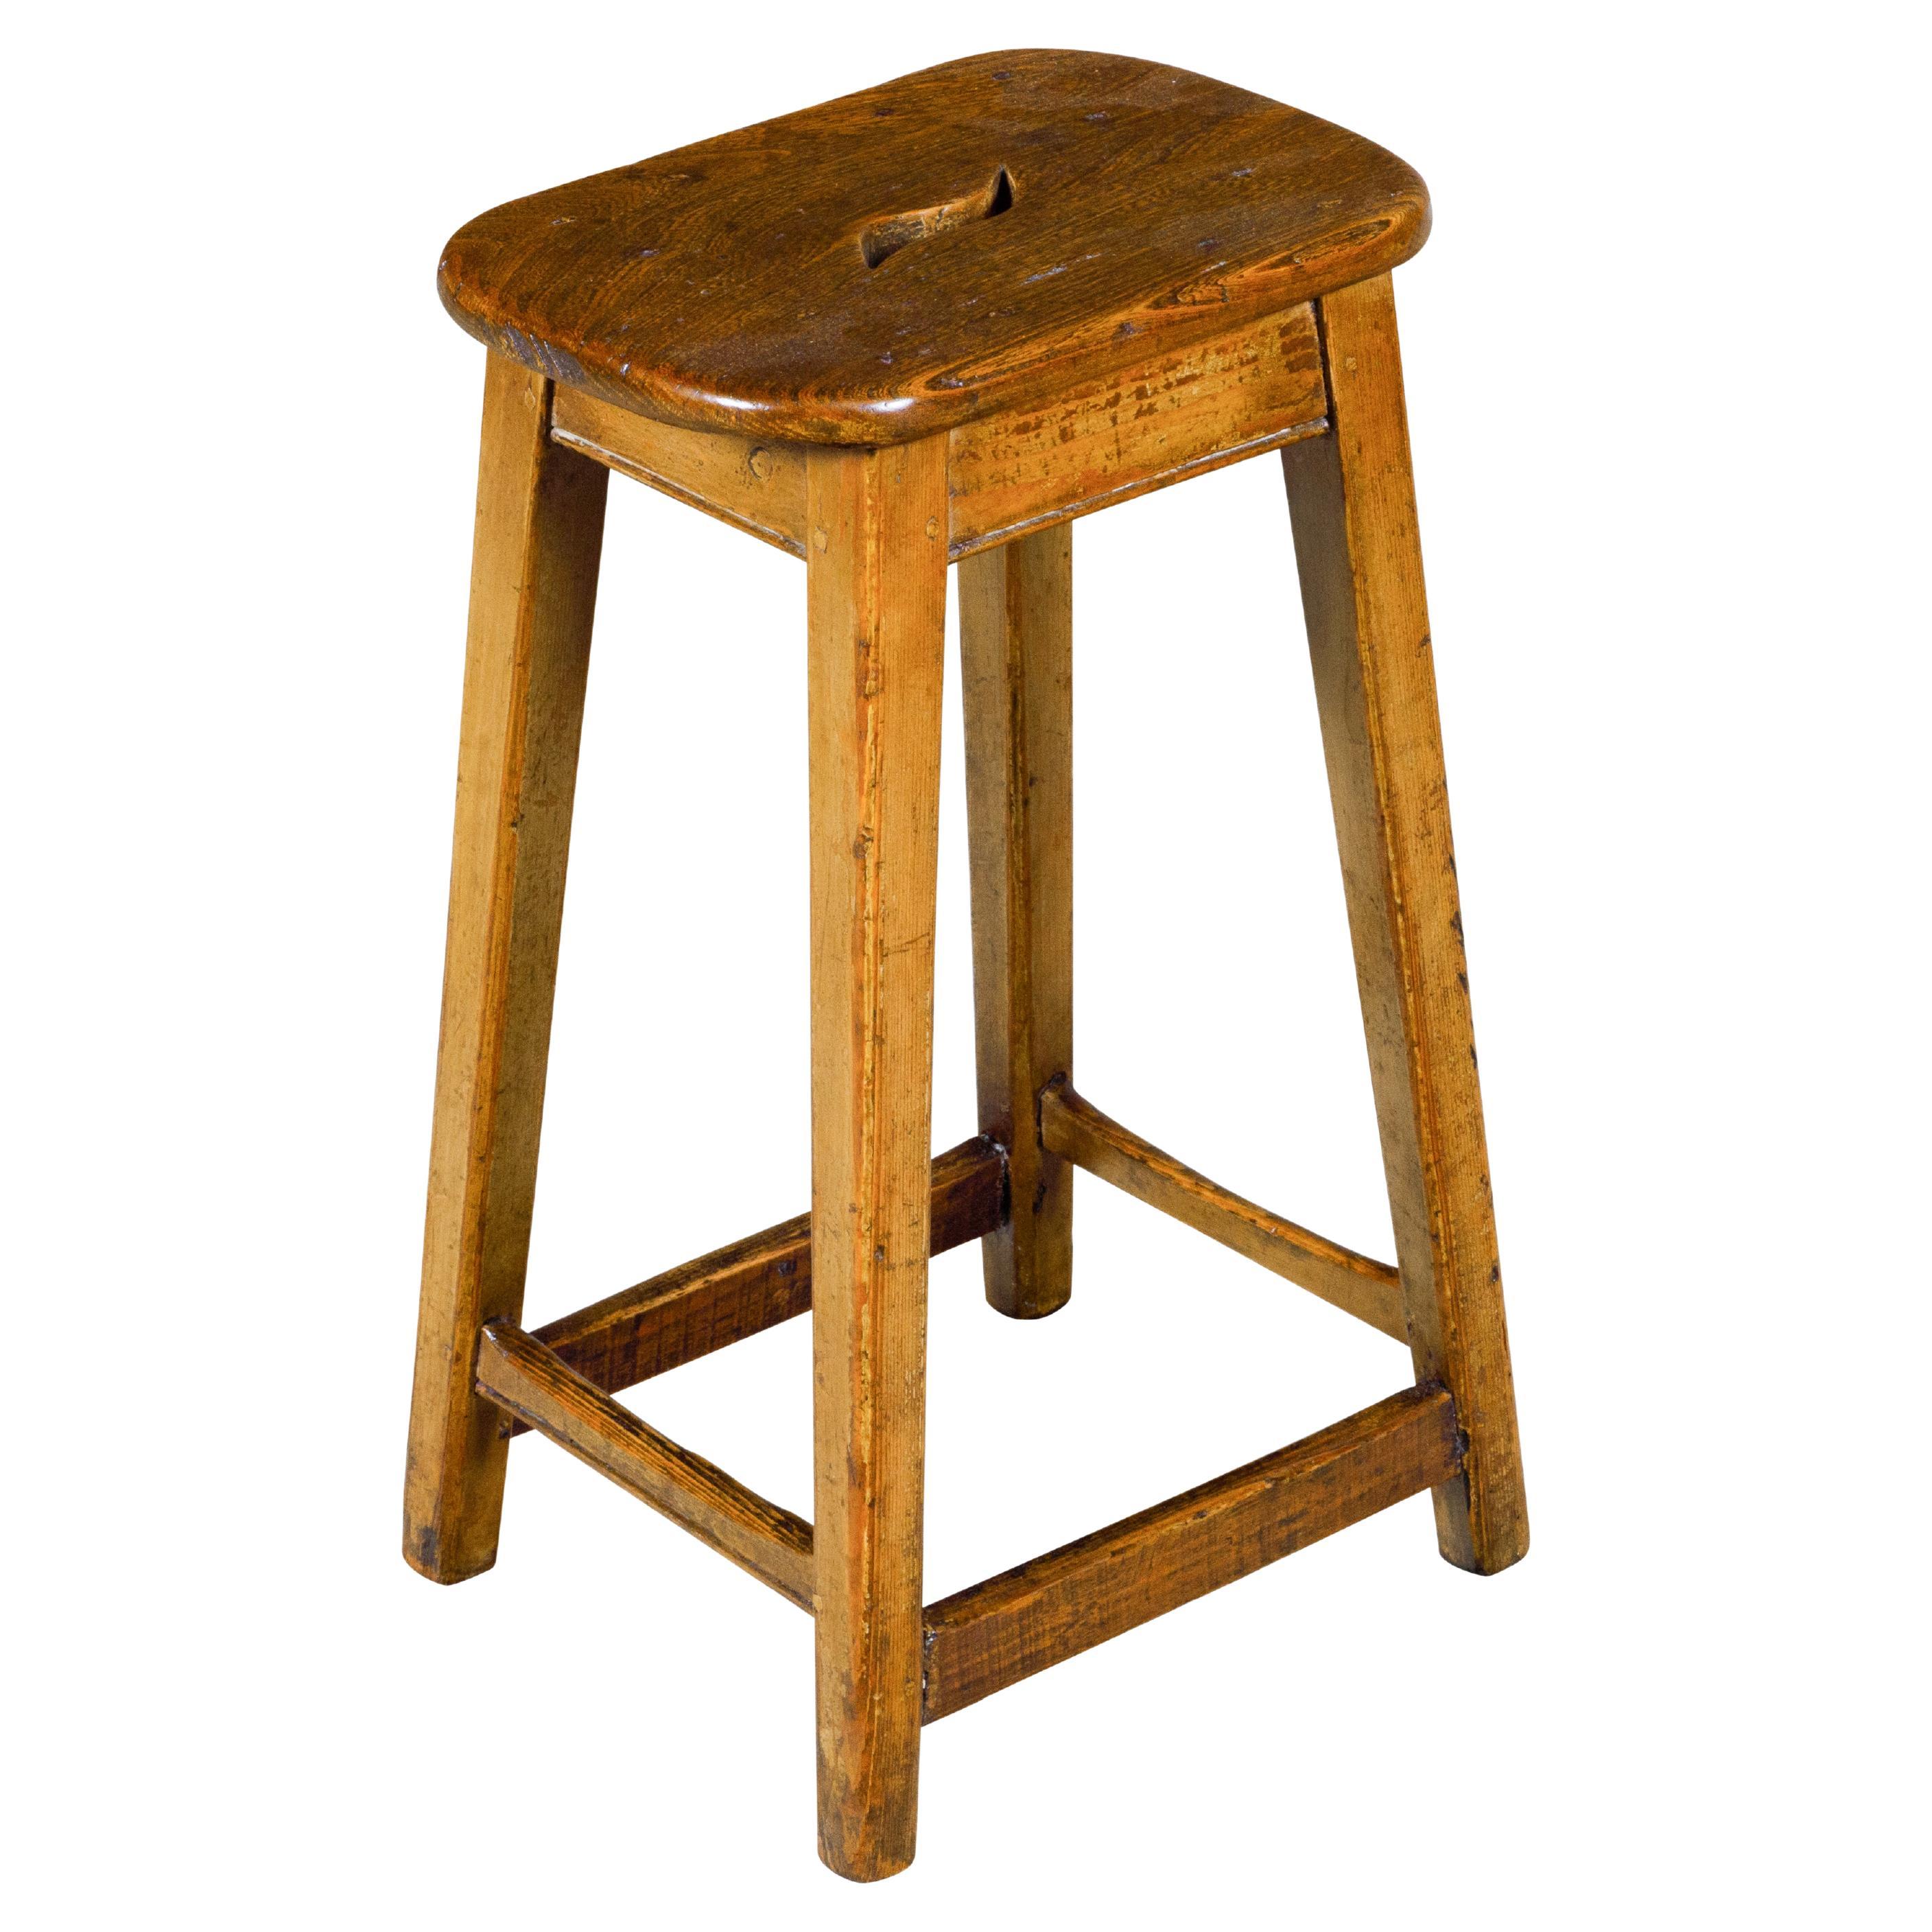 English 19th Century Pine Stool with Stretchers and Rustic Character For Sale